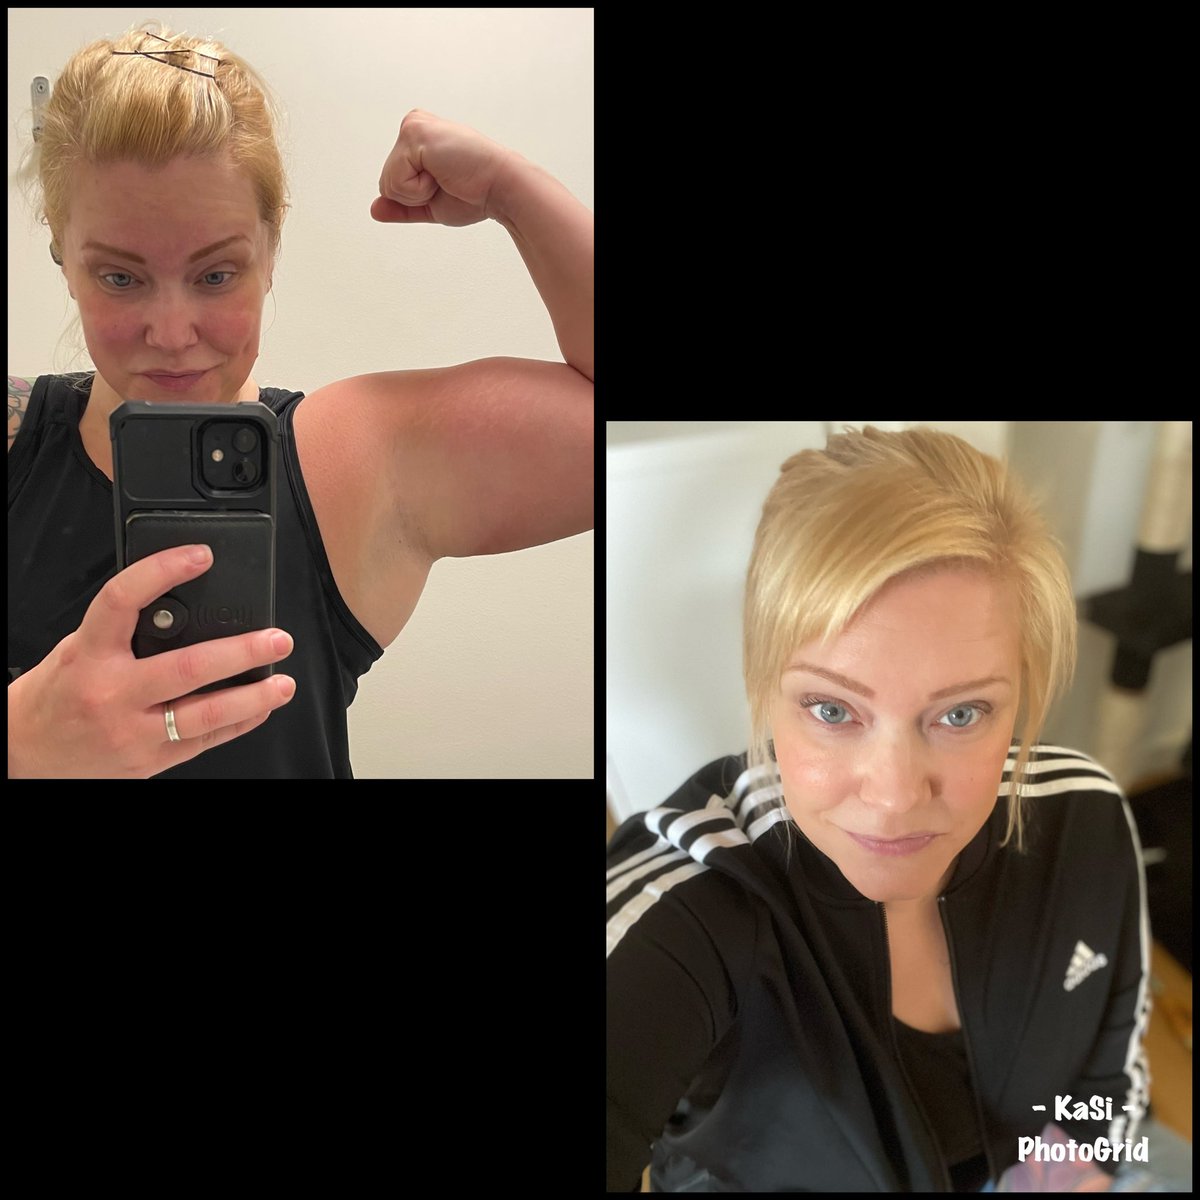 Mon: #Biceps, shoulders & back 😍💪 Tue: 3hrs sleep = rest 😴 Wed: Zombie 🧟‍♀️ mode… Thu: Grocery shopping 🛍 Fri: Slept 13 hrs 😳 Hellooooo #fibro 😅 Sat: Tris, shoulders & chest 🤗 Sun: Pain, pain, stupid pain.. 😤 Took it one day at a time 🤷🏼‍♀️ & worked all days except Monday